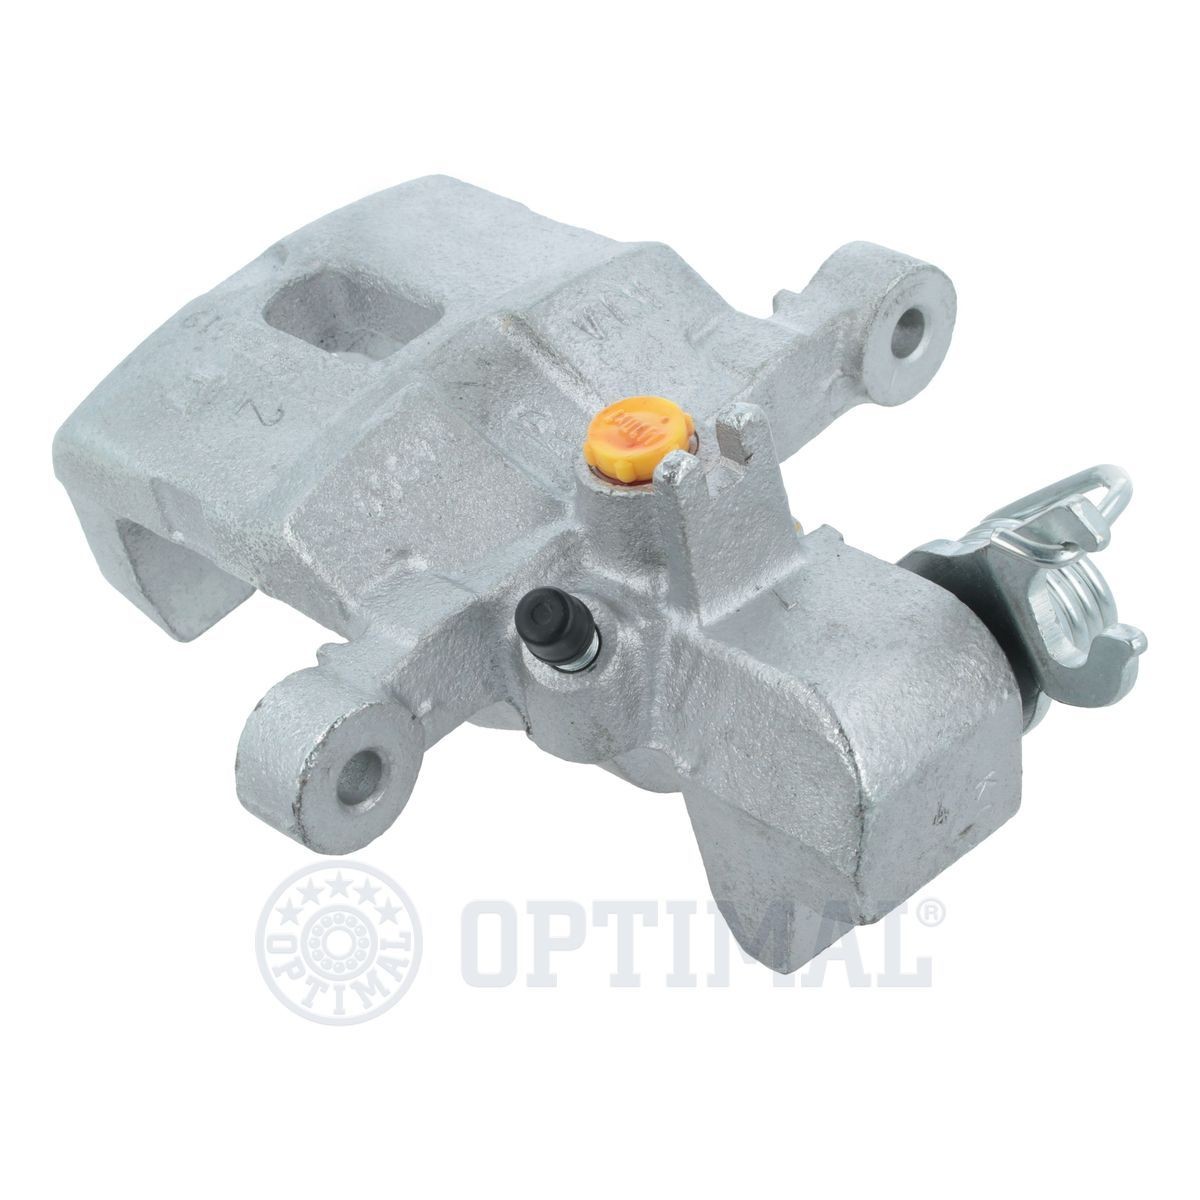 OPTIMAL BC-1028R Brake caliper Grey Cast Iron, Rear Axle Right, with accessories, without holding frame